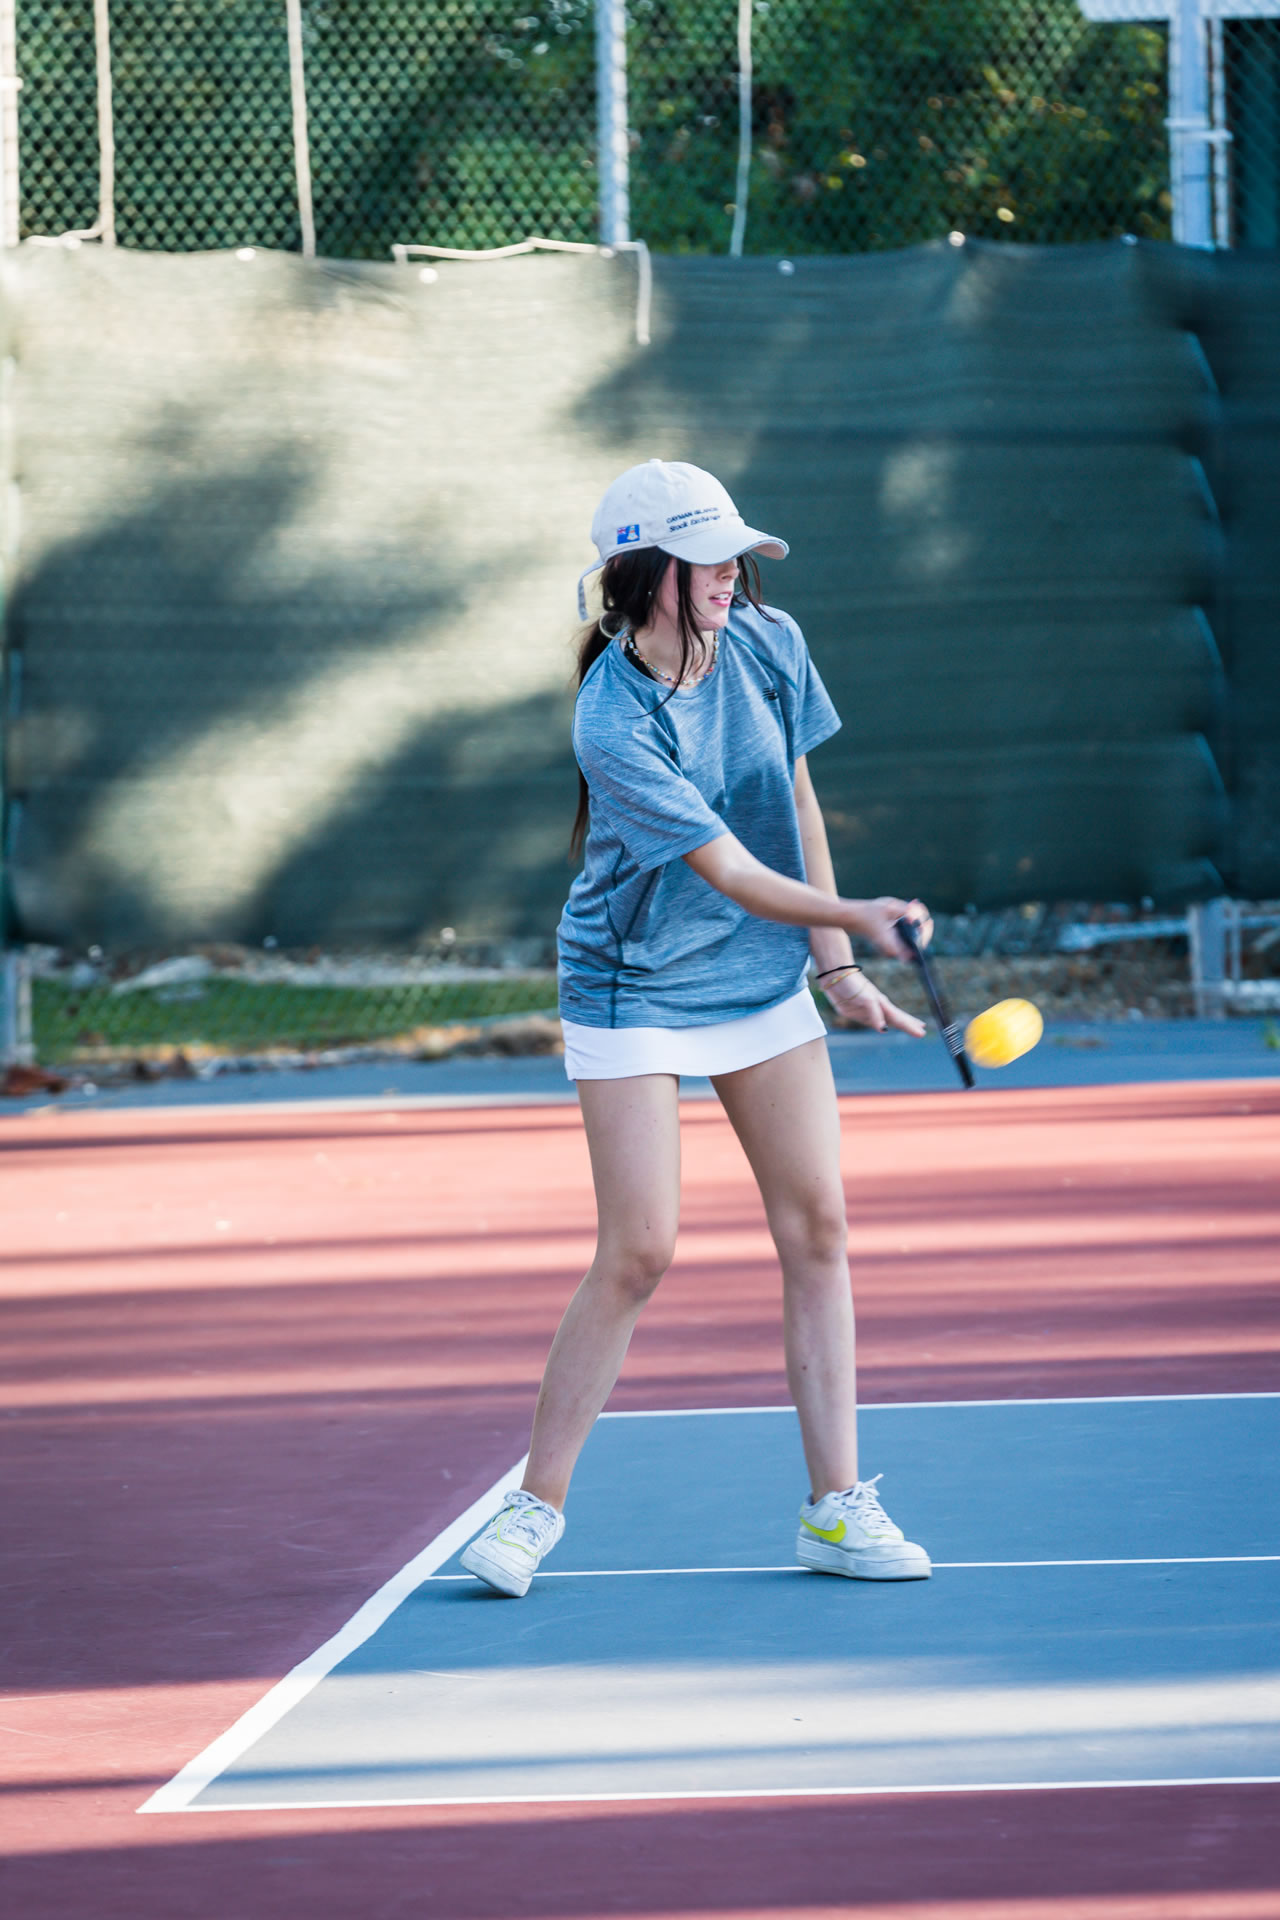 Young woman playing pickelball at the Grand Caymanian Resort.